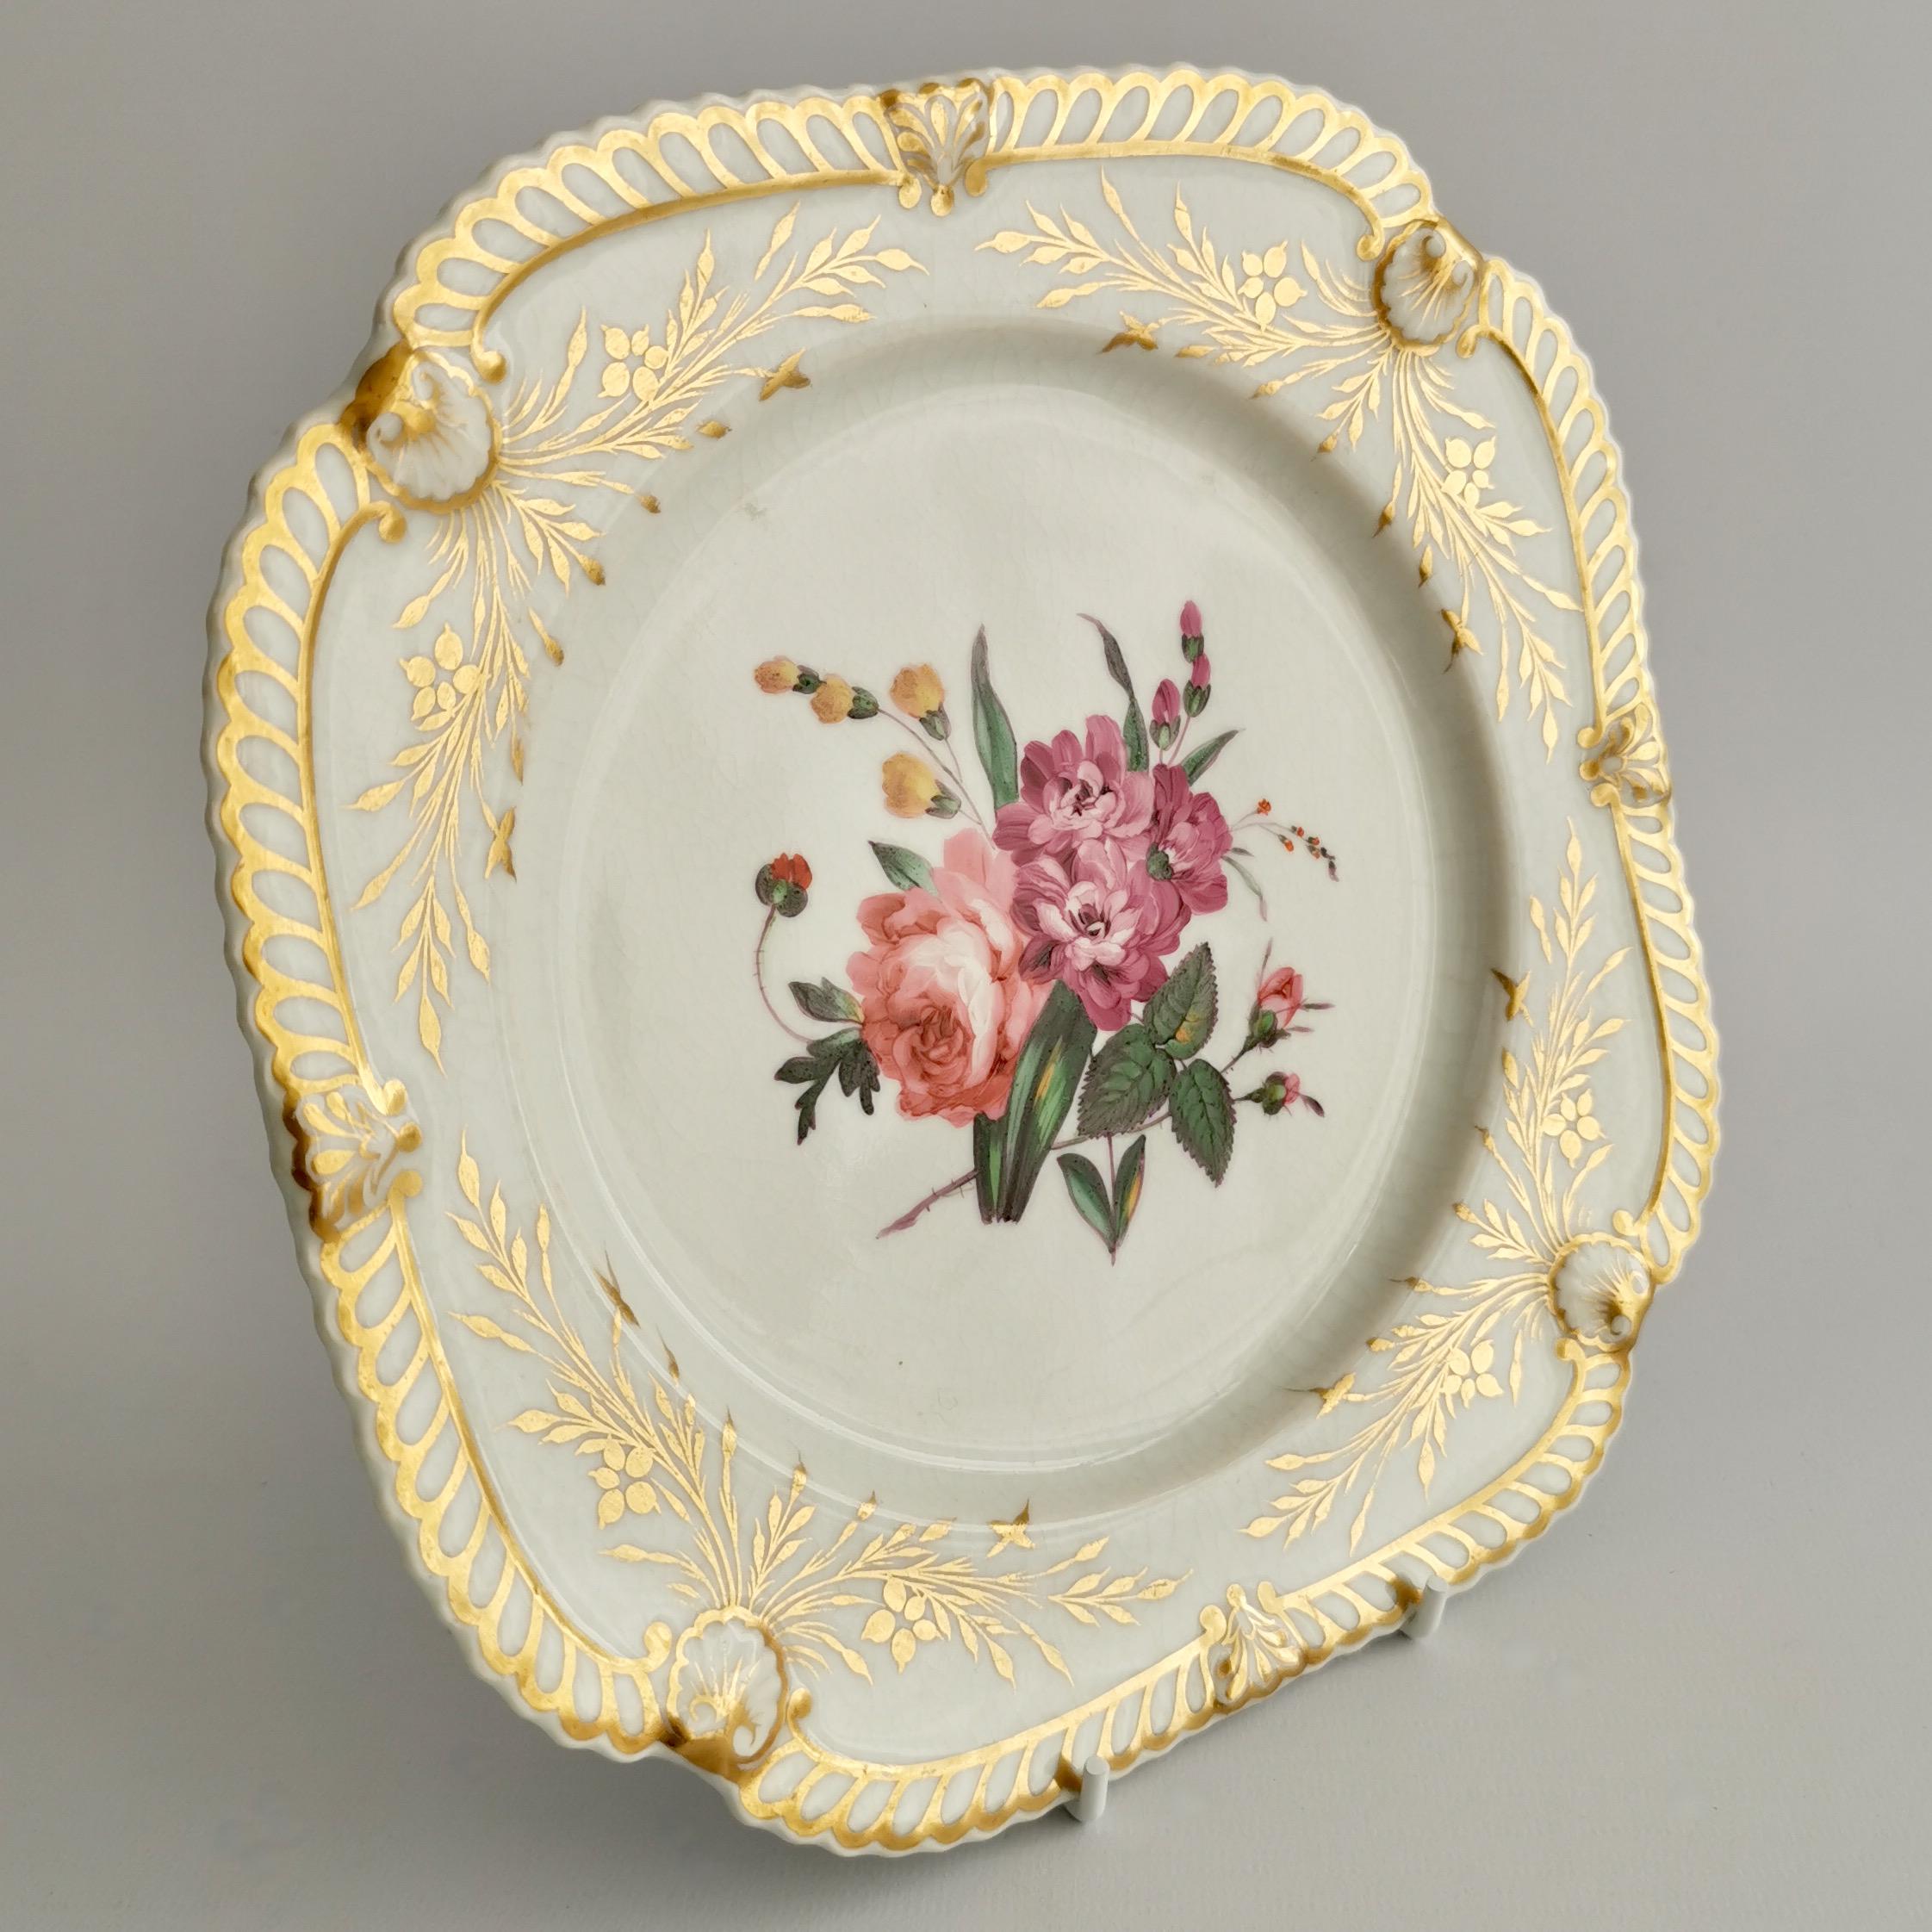 Porcelain Plate, Chamberlains Worcester, White with Flowers, Regency ca 1822 '2' 5